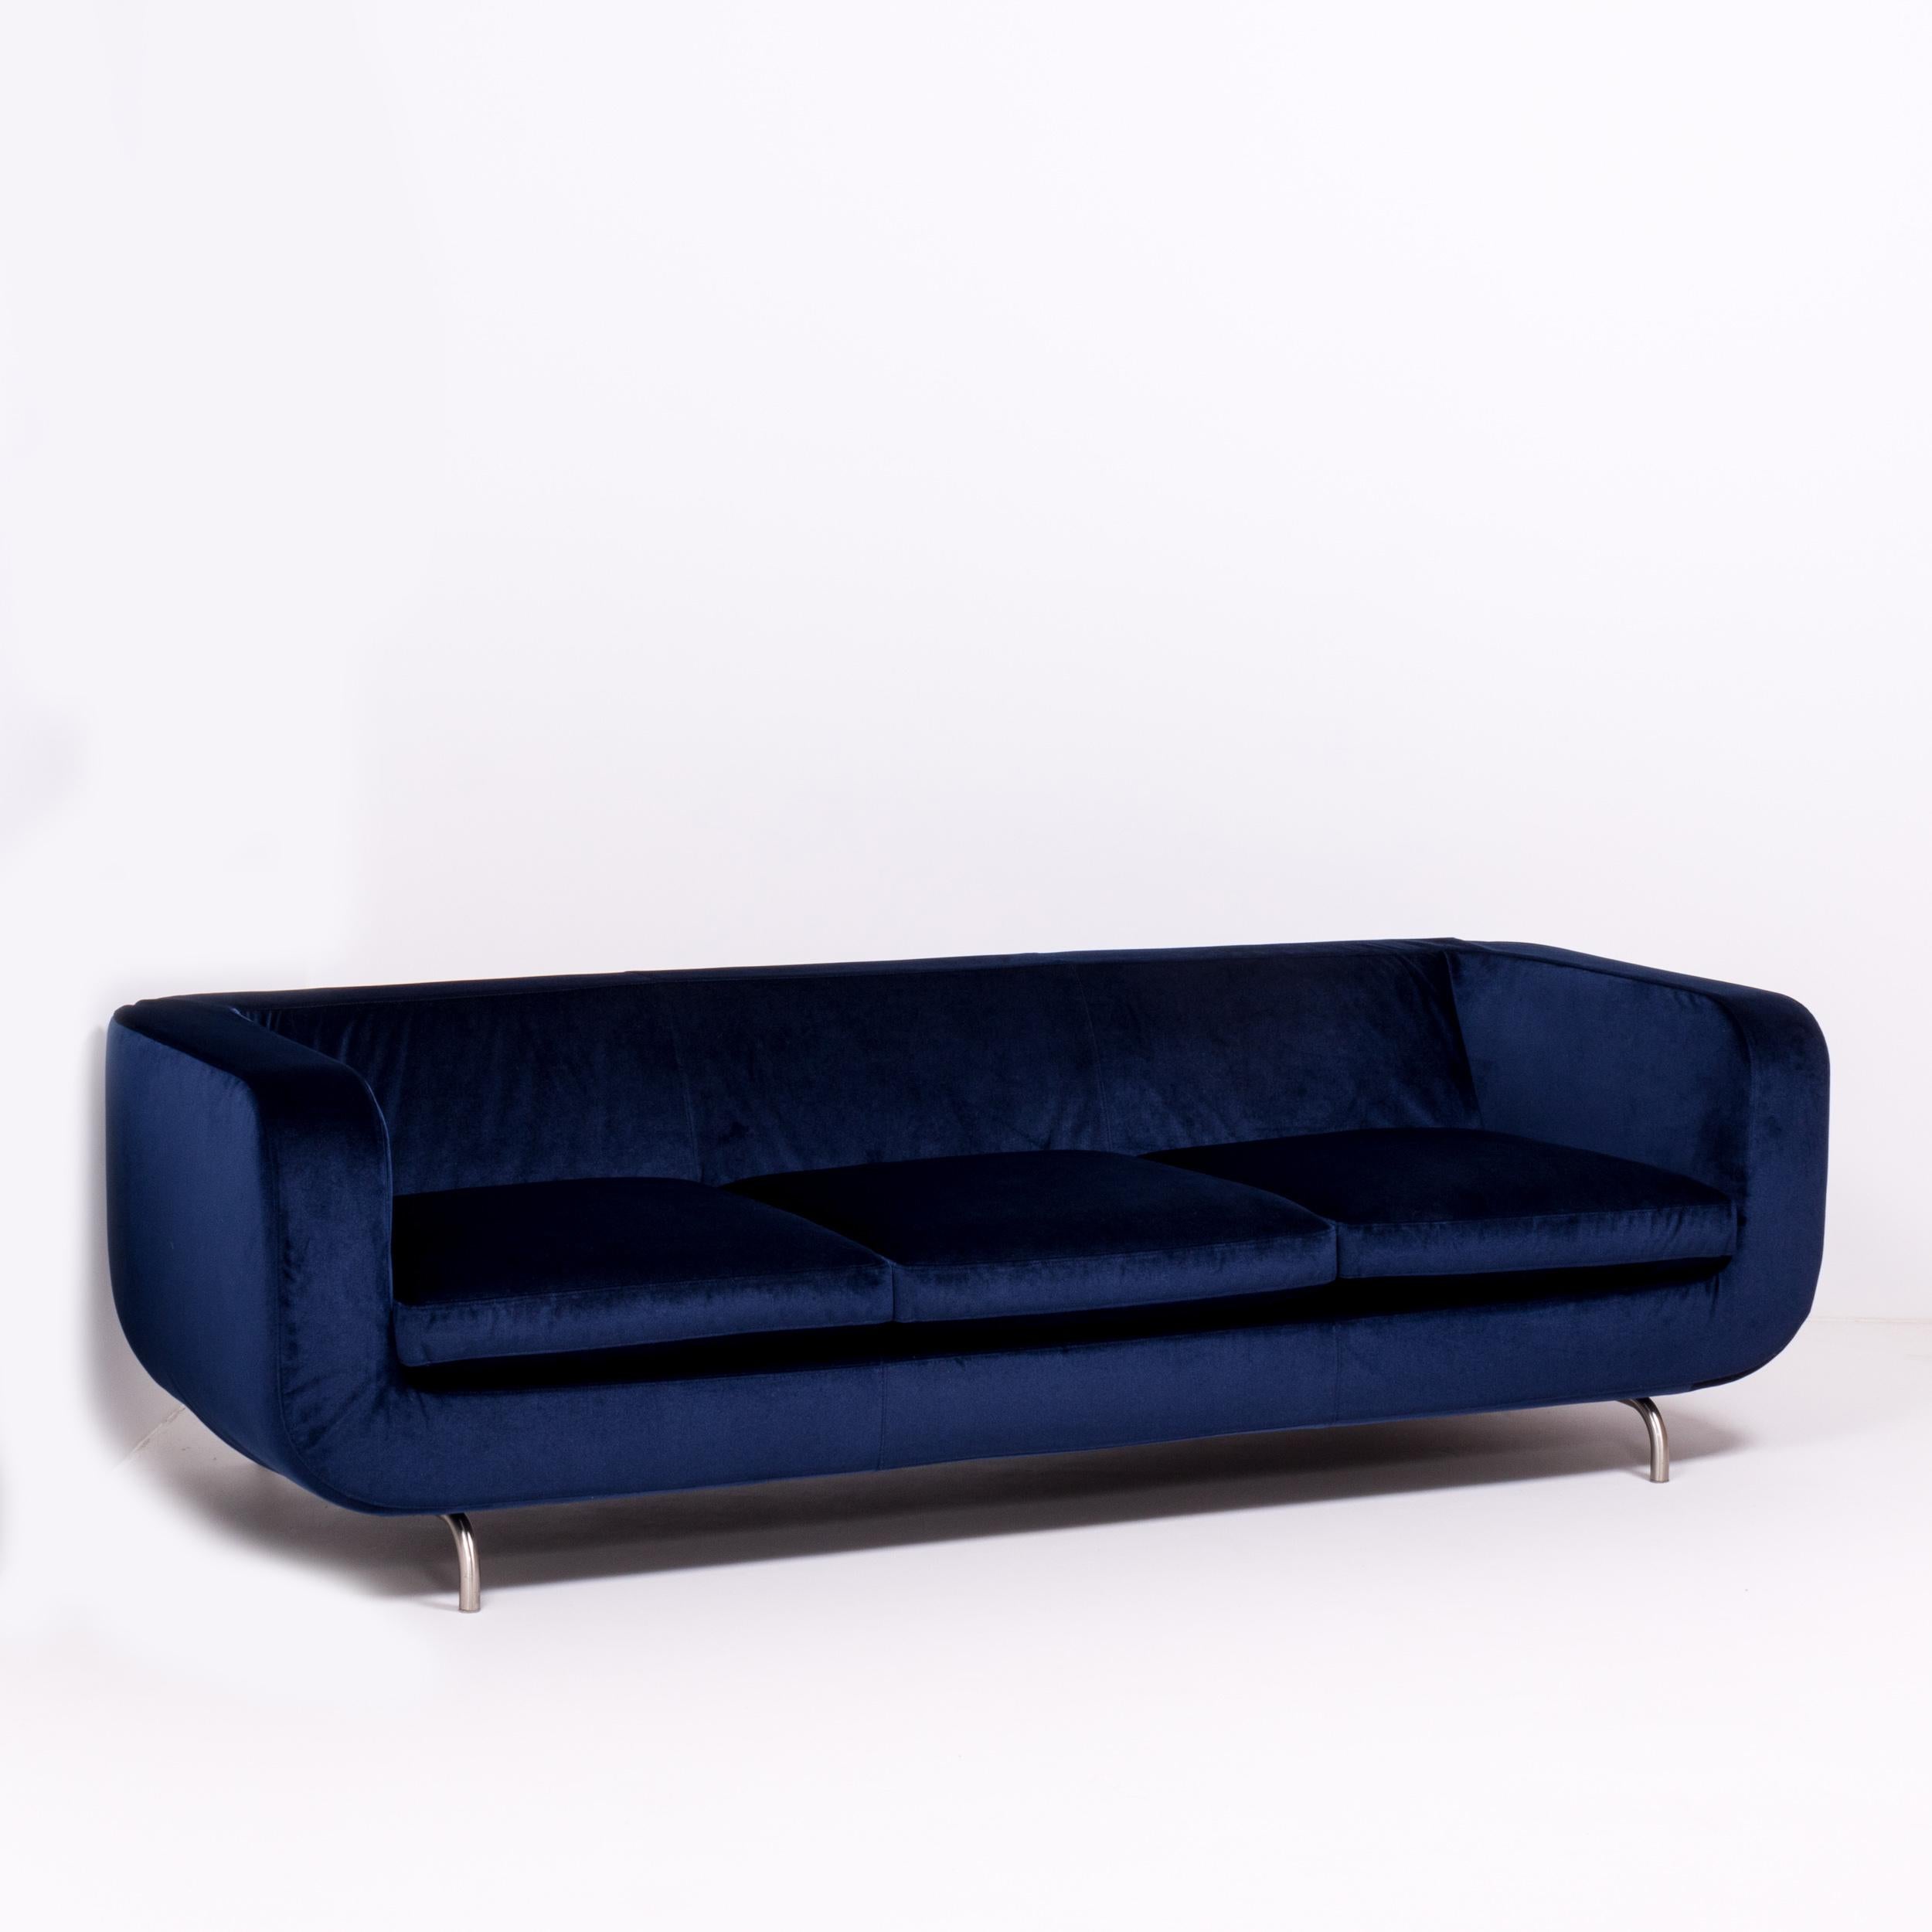 Combining modernist curves with sleek straight lines, this Dubuffet three-seat sofa was designed by Rodolfo Dordoni for Mintotti. 

The sculptural sofa has been newly reupholstered in a plush, royal blue velvet. The cover can be removed with two